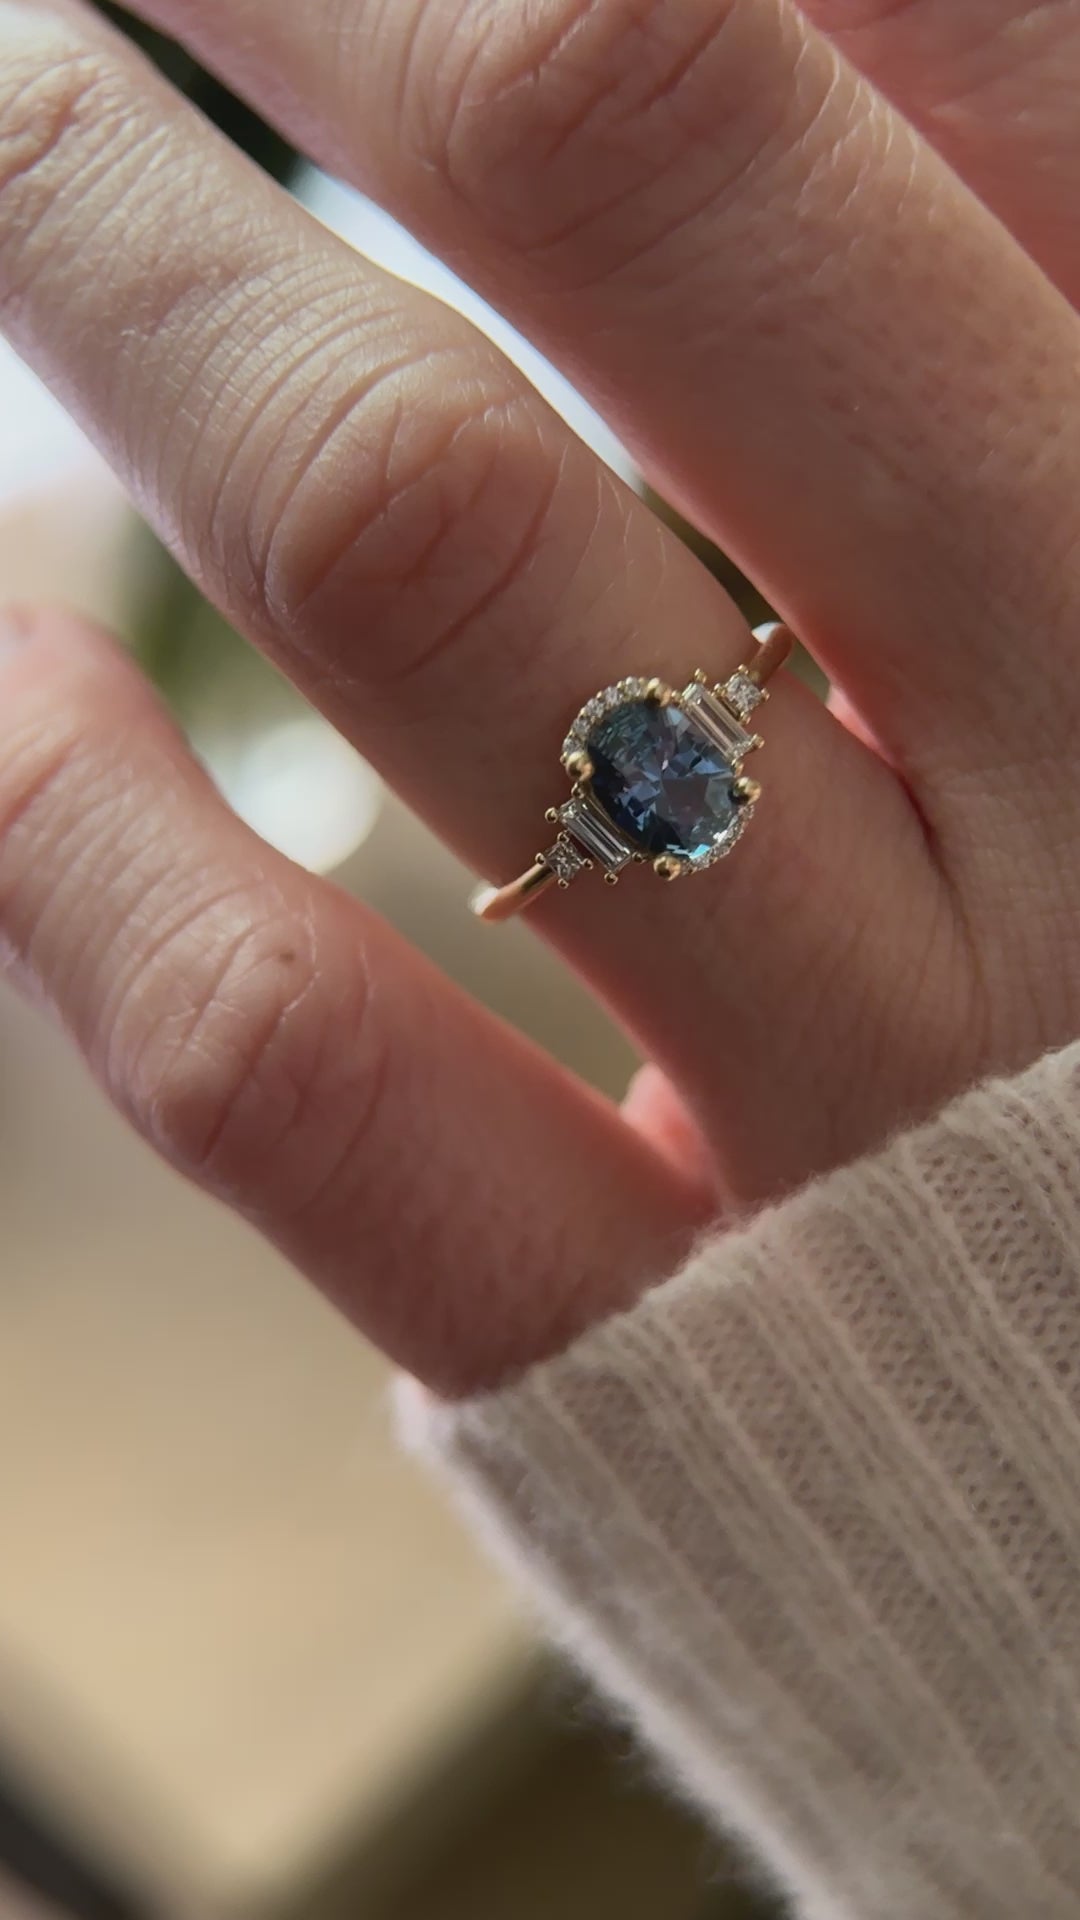 The Sura 1 CT Oval Blue Sapphire Ring